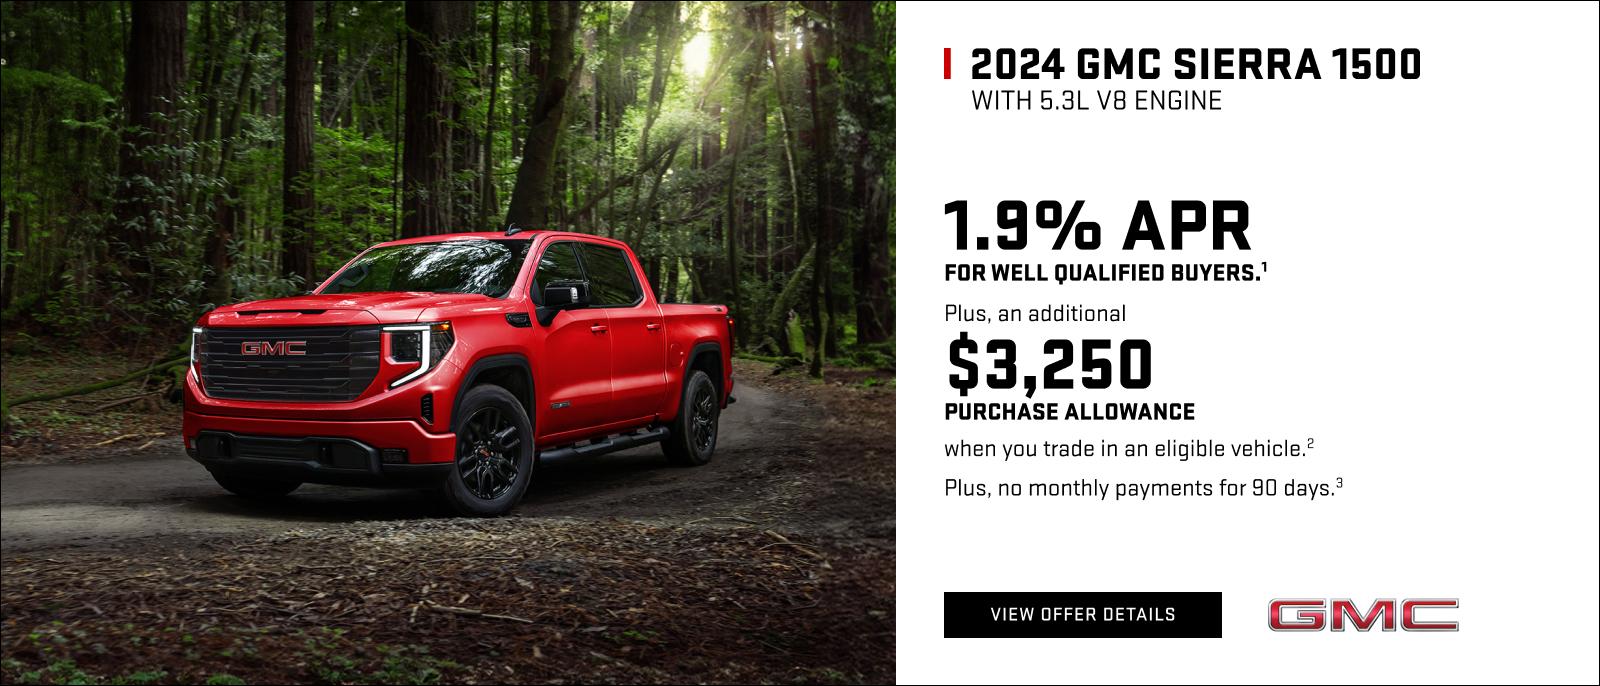 1.9% APR for well-qualified buyers.1

Plus, an additional $3,250 PURCHASE ALLOWANCE when you trade in an eligible vehicle.2

Plus, no monthly payments for 90 days. 3